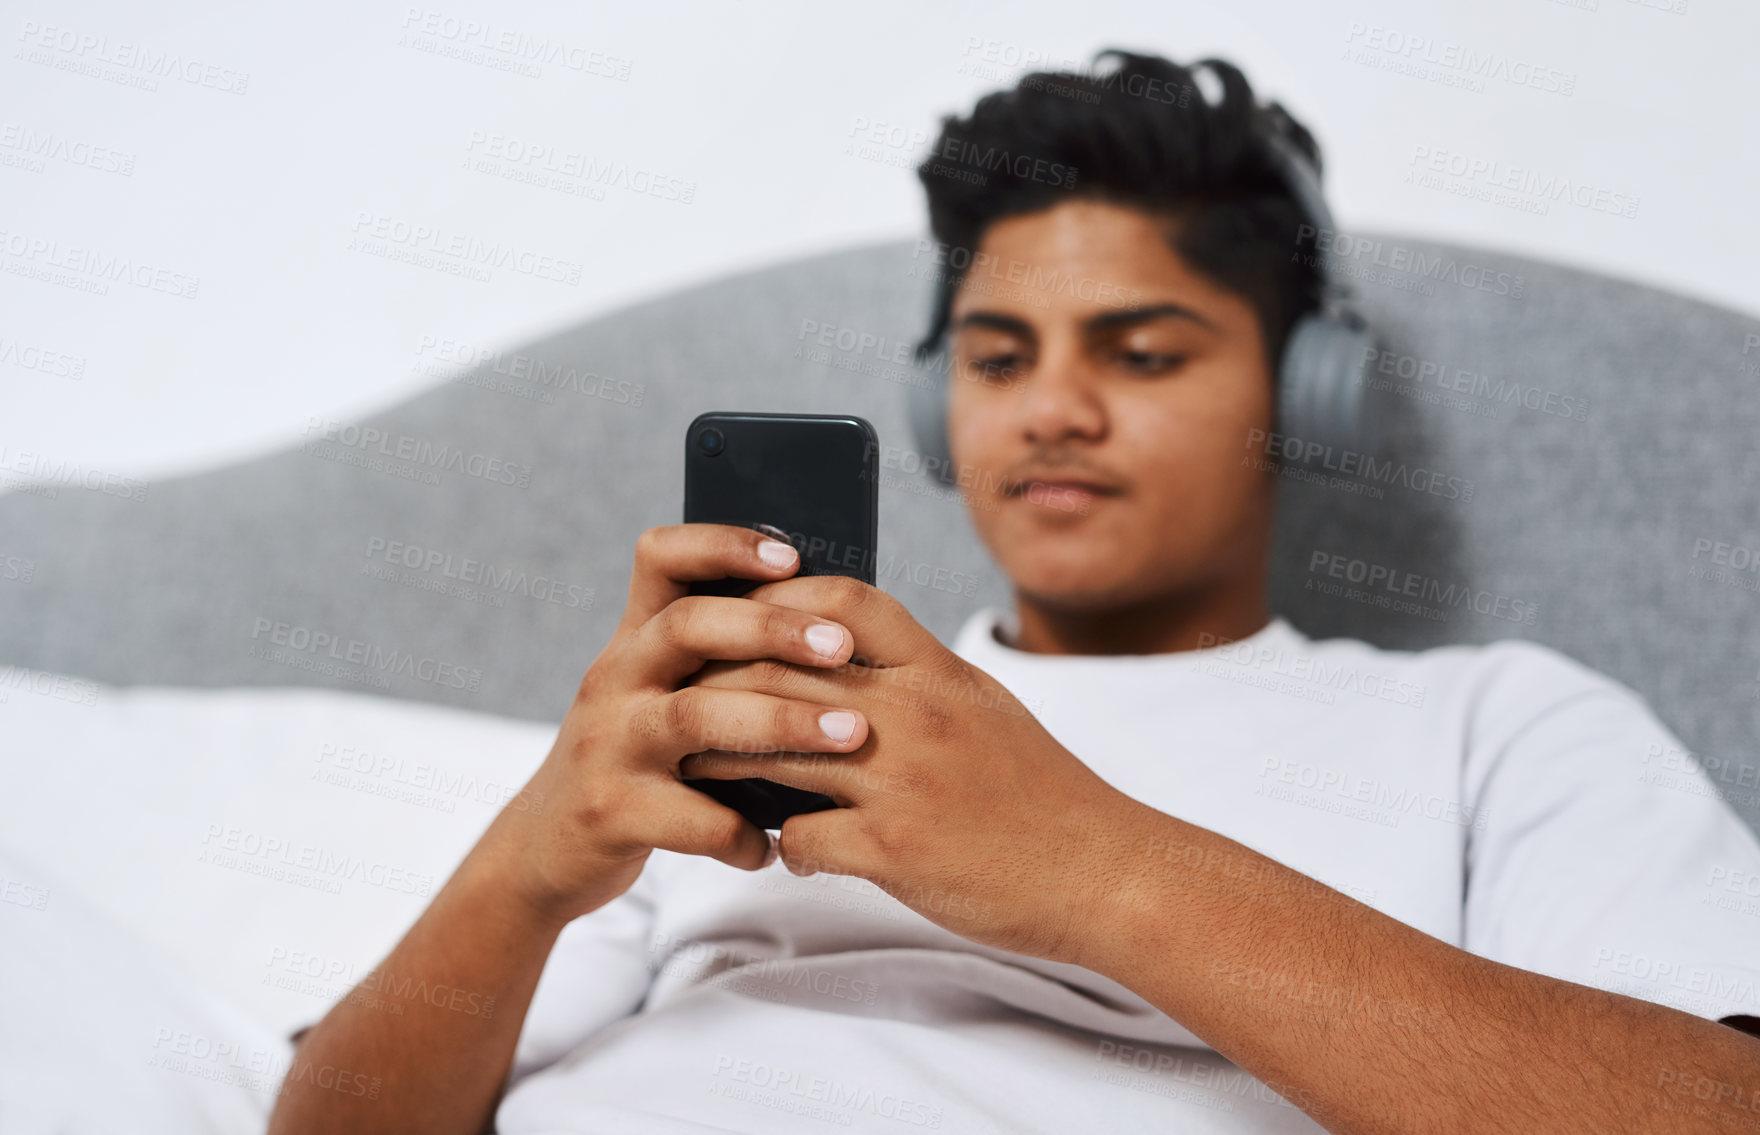 Buy stock photo Cropped shot of a young man using his cellphone while listening to music through his headphones